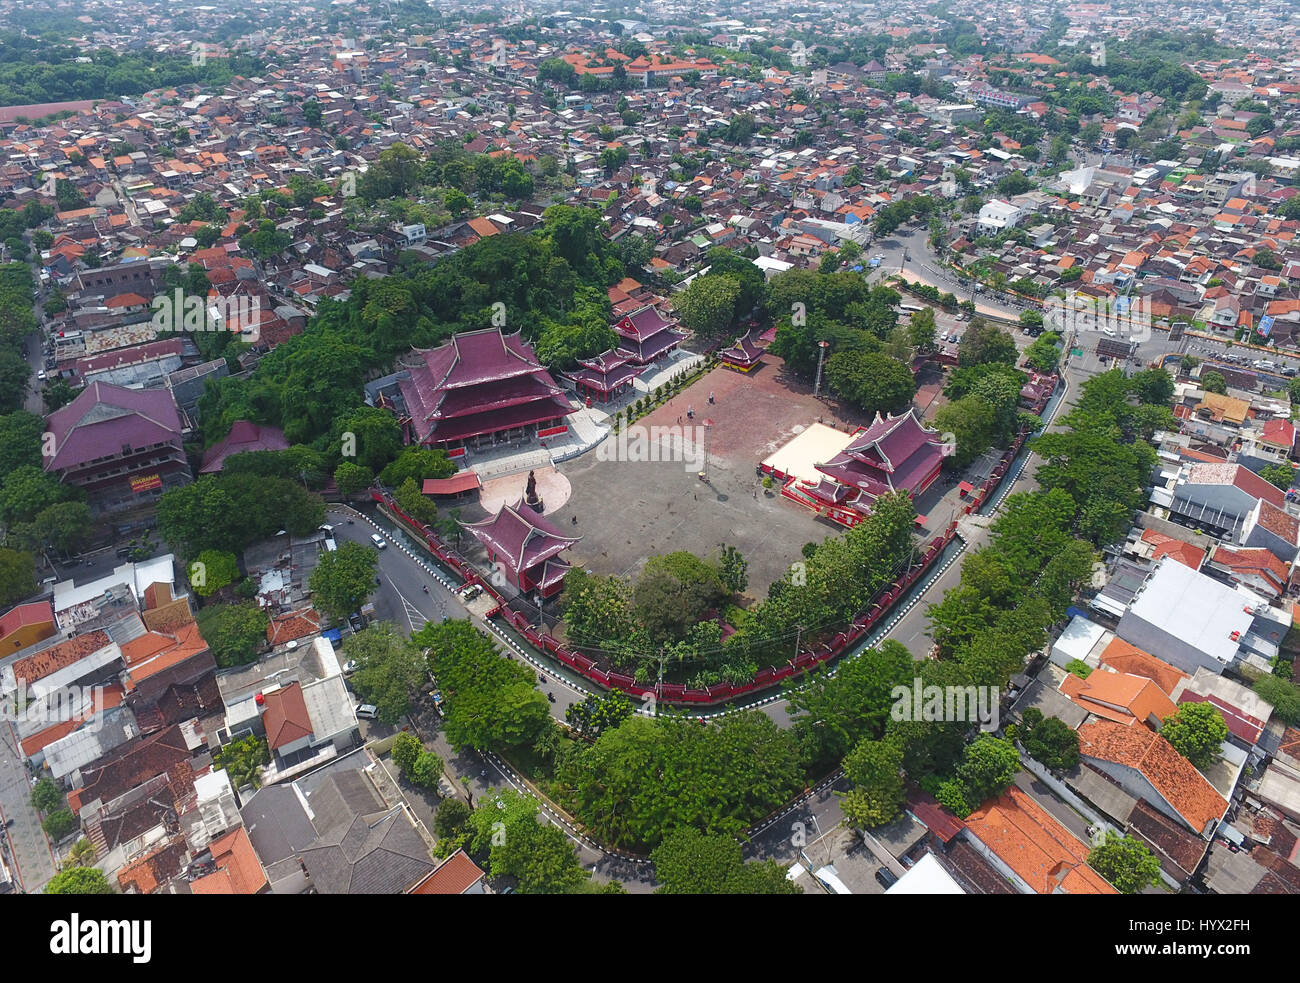 (170407) -- SEMARANG(INDONESIA), April 7, 2017 (Xinhua) -- Photo taken on April 4, 2017 shows the Sam Poo Kong Temple, which was built in memory of the Chinese Ming Dynasty (1368-1644) navigator Zheng He's arrival at Semarang, in Semarang, Indonesia. Chinese navy explorer Zheng He who visited the Central Java Province's port city of Semarang 600 years ago has an enduring legacy in the capital of the province. Arriving here at the beginning of the 15th century, Zheng He made a cave on the Simongan Hill as his temporary abode and repaired his ships. During his stay, Zheng He built a mosque and s Stock Photo